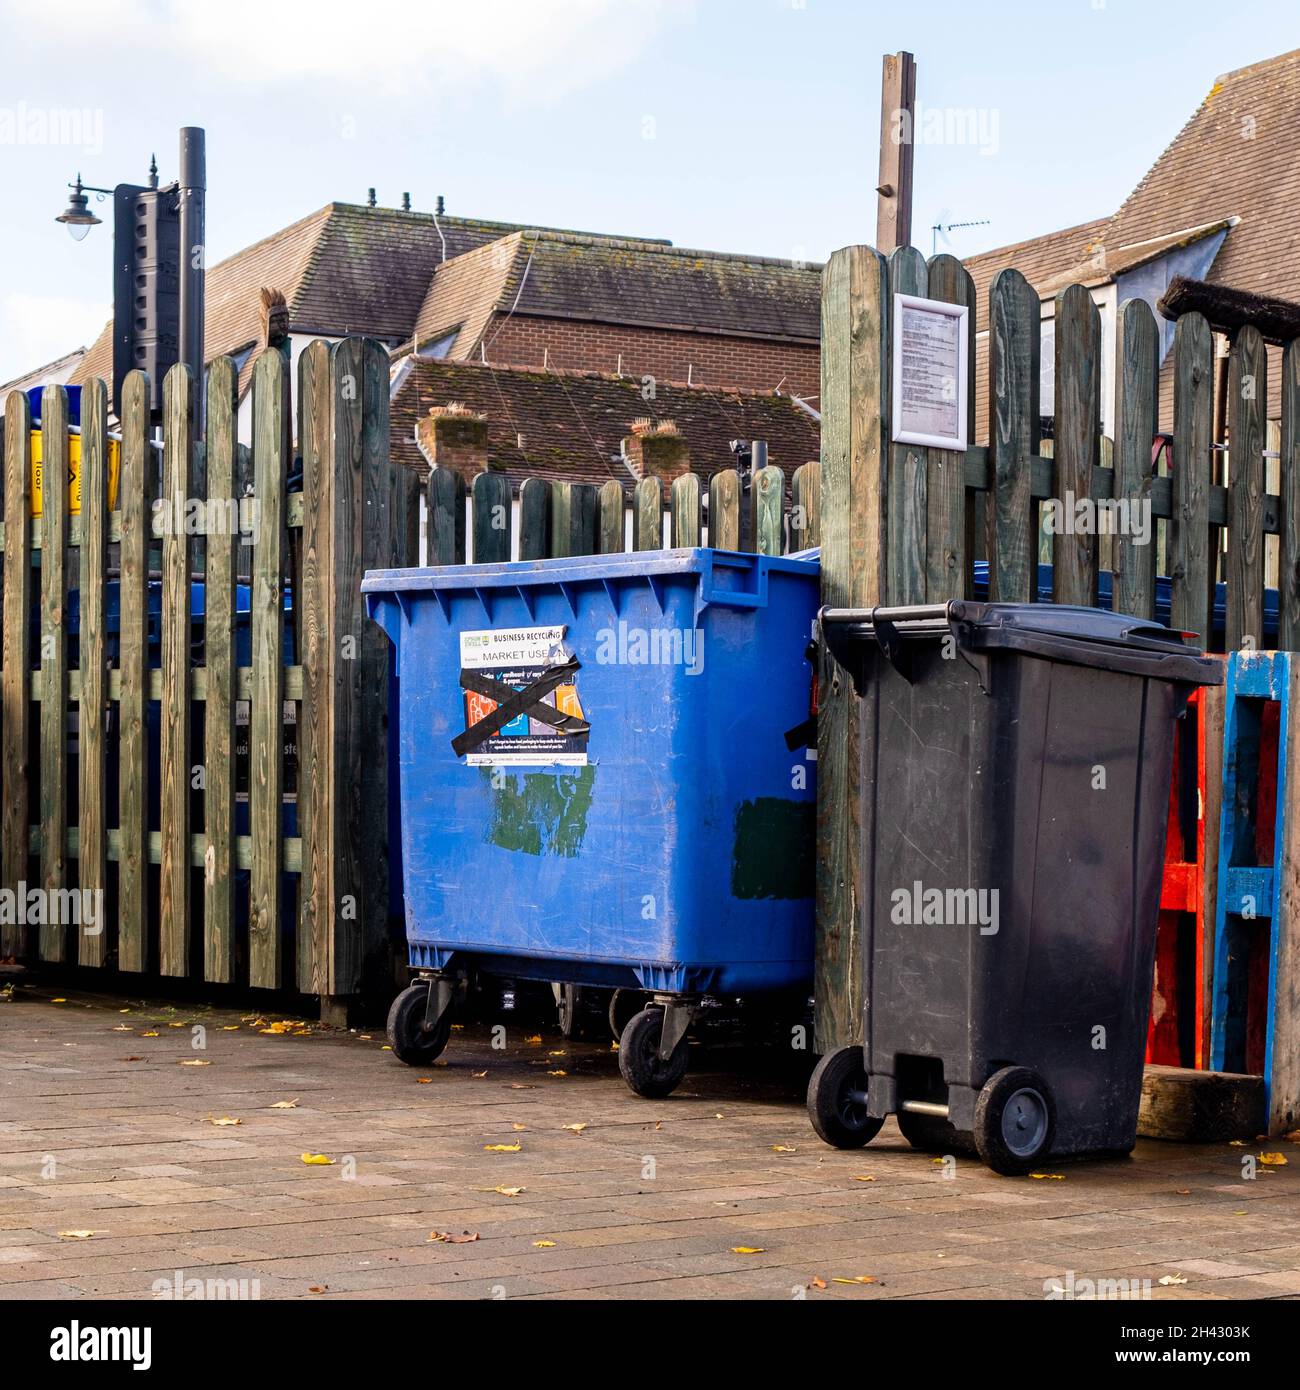 Epsom Surrey London UK, October 31 2021, Council High Street Town Centre Wheelie Bin Storage Area With No People Stock Photo